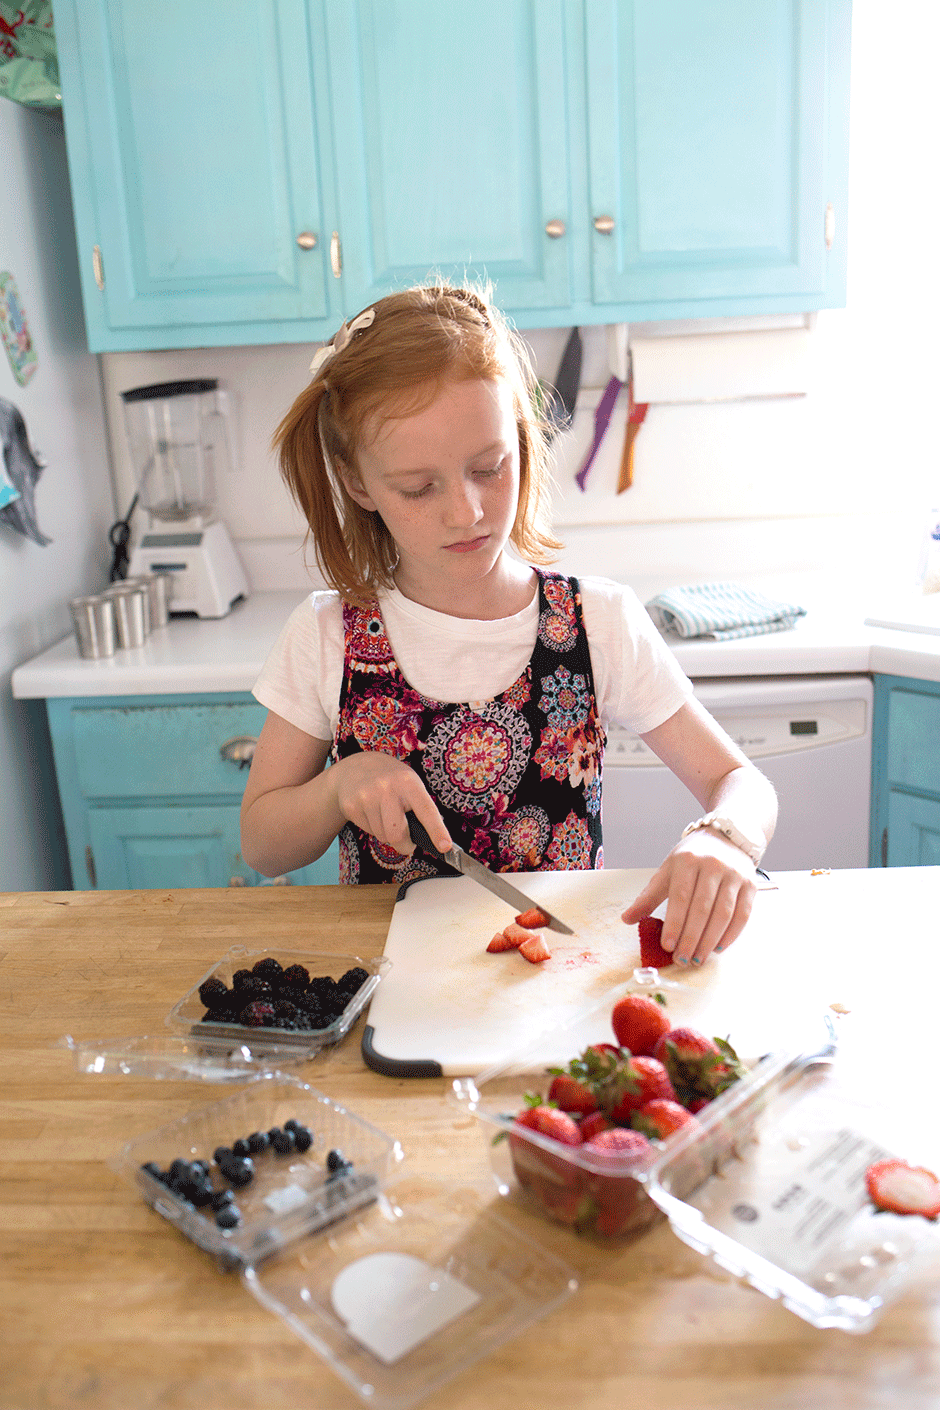 Teach your children to help out in the kitchen safely and enjoyably! By giving them age appropriate tasks and allowing them to help when they're willing, kids grow up with valuable skills and an excitement to participate in mealtime prep. Even the smallest children can help in the kitchen!